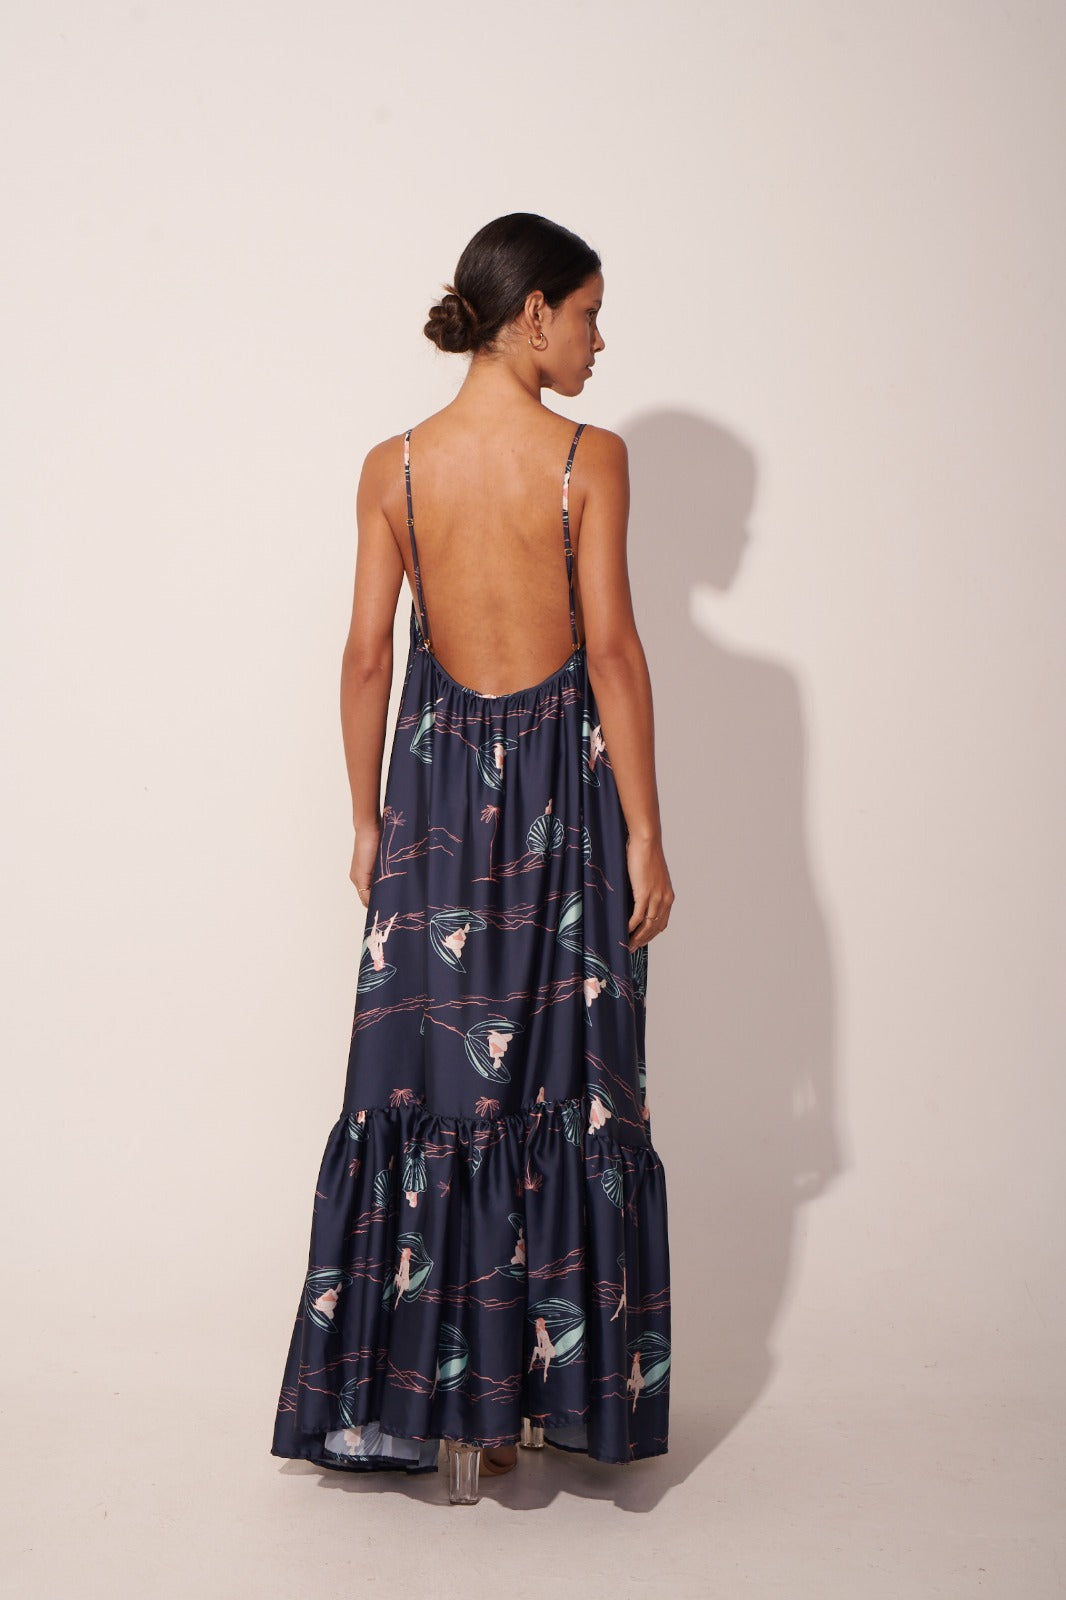 The Staycation Blue Maxi Dress